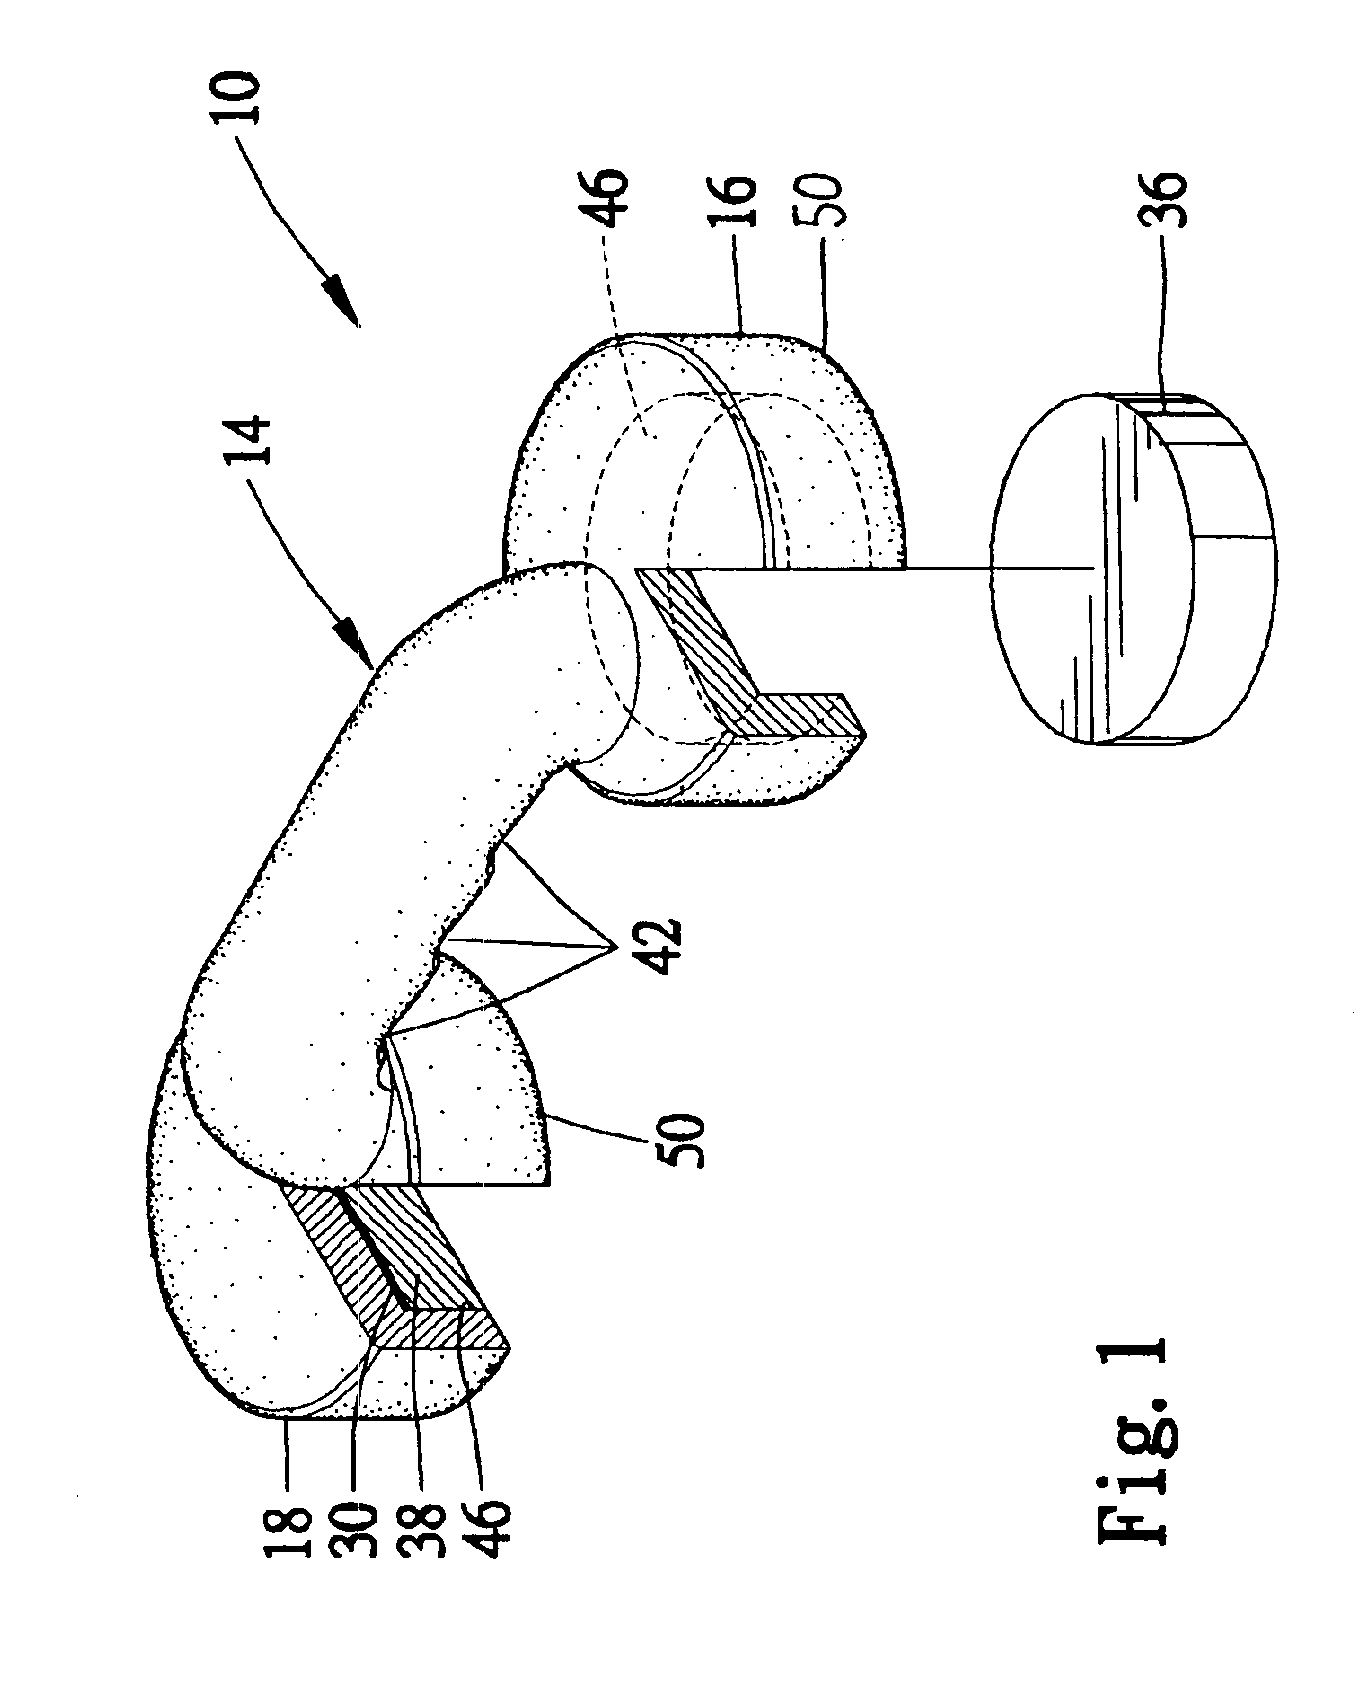 Brackets and methods for holding wires utilizing magnetic force